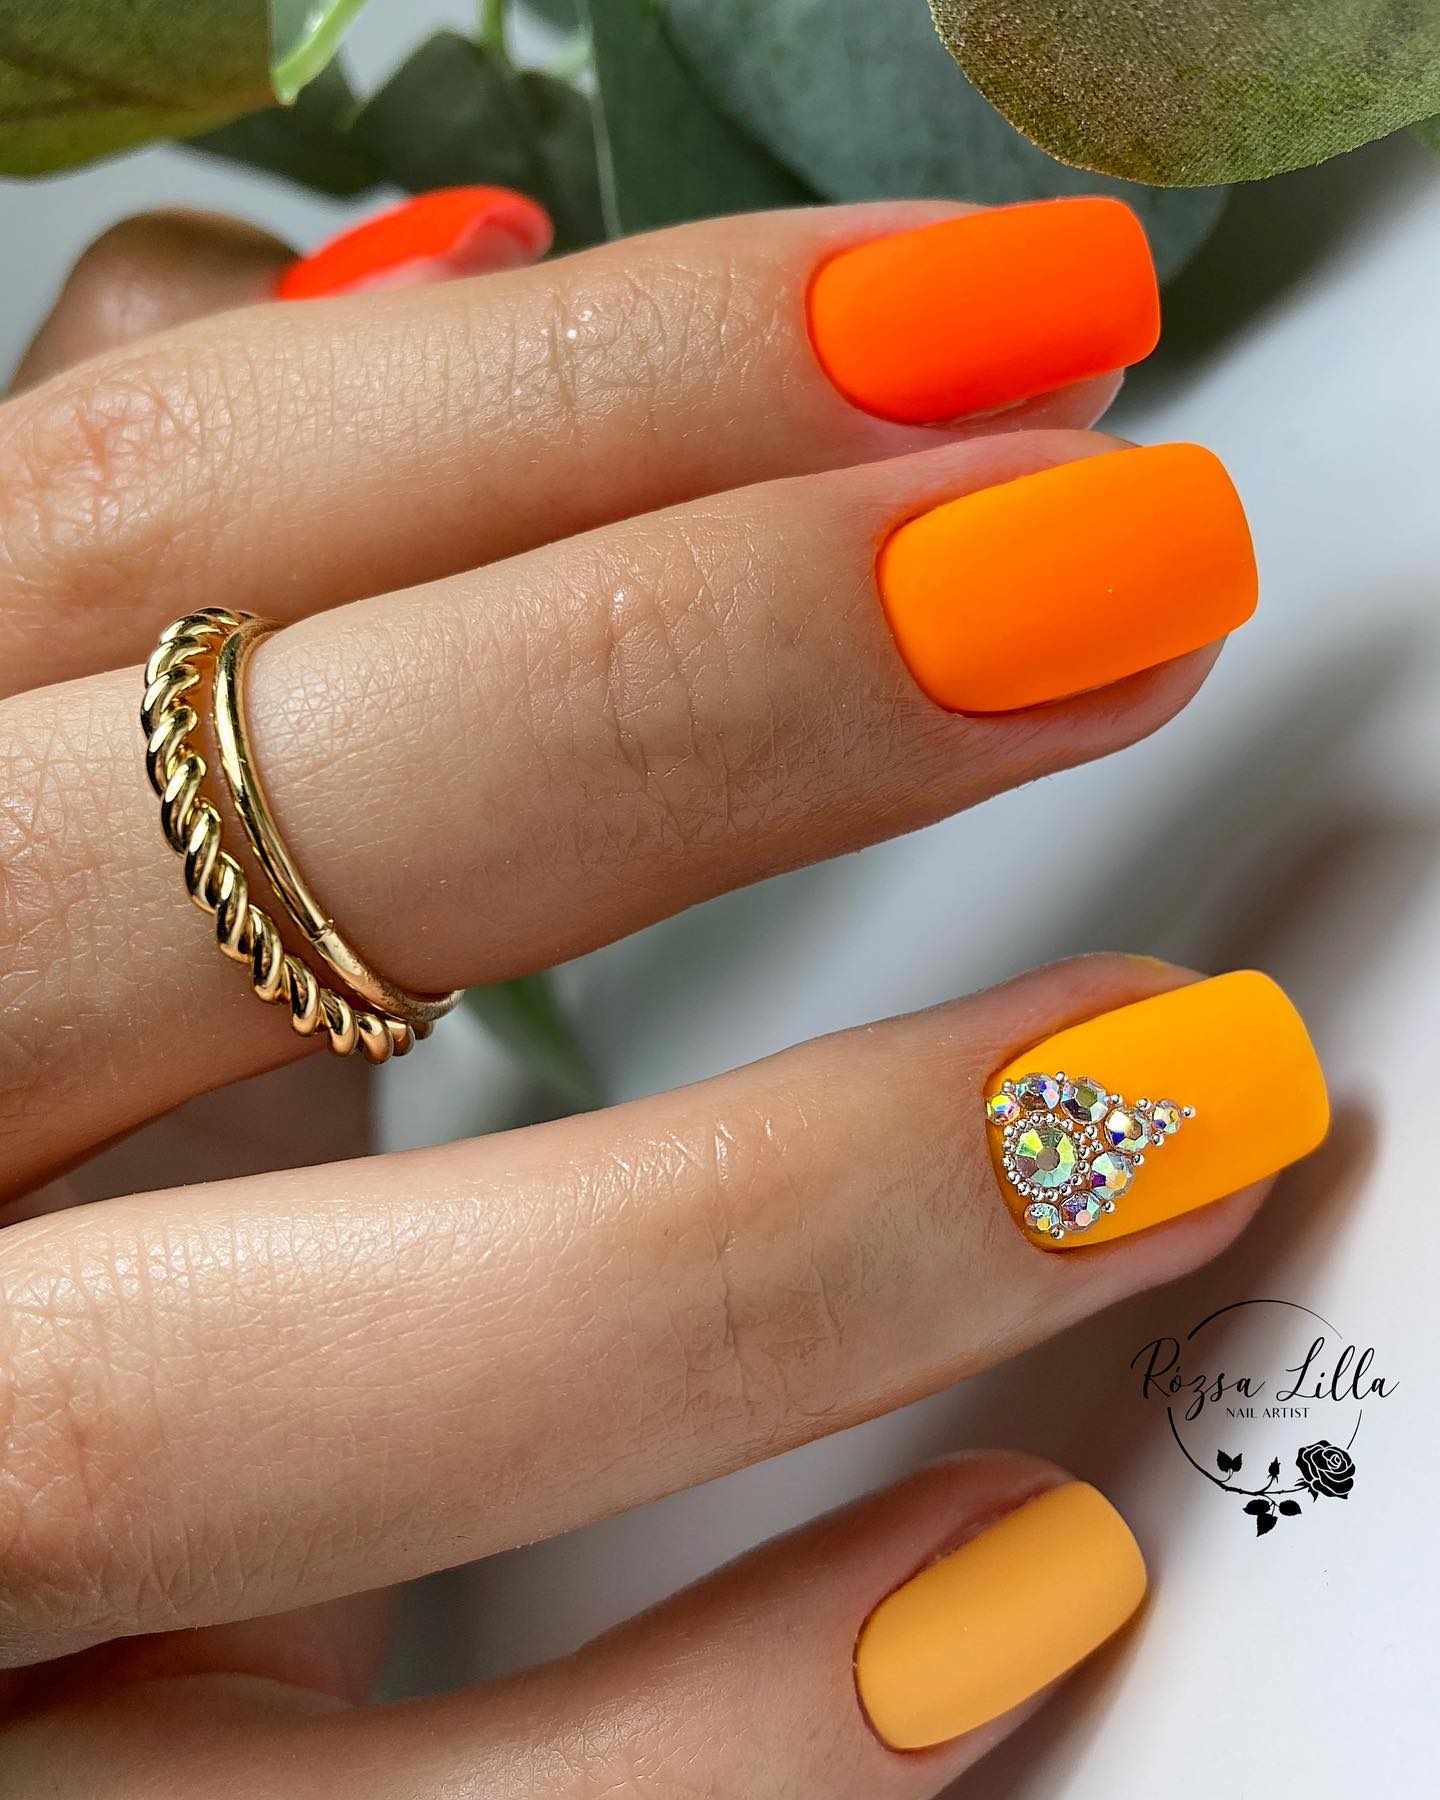 Orange is a very vibrant color so you can get a lot of variation from it. Now it is time to apply different shades of it on your nails together. Short matte orange nails will take your mani to a different level with a shiny stone on accent nail.